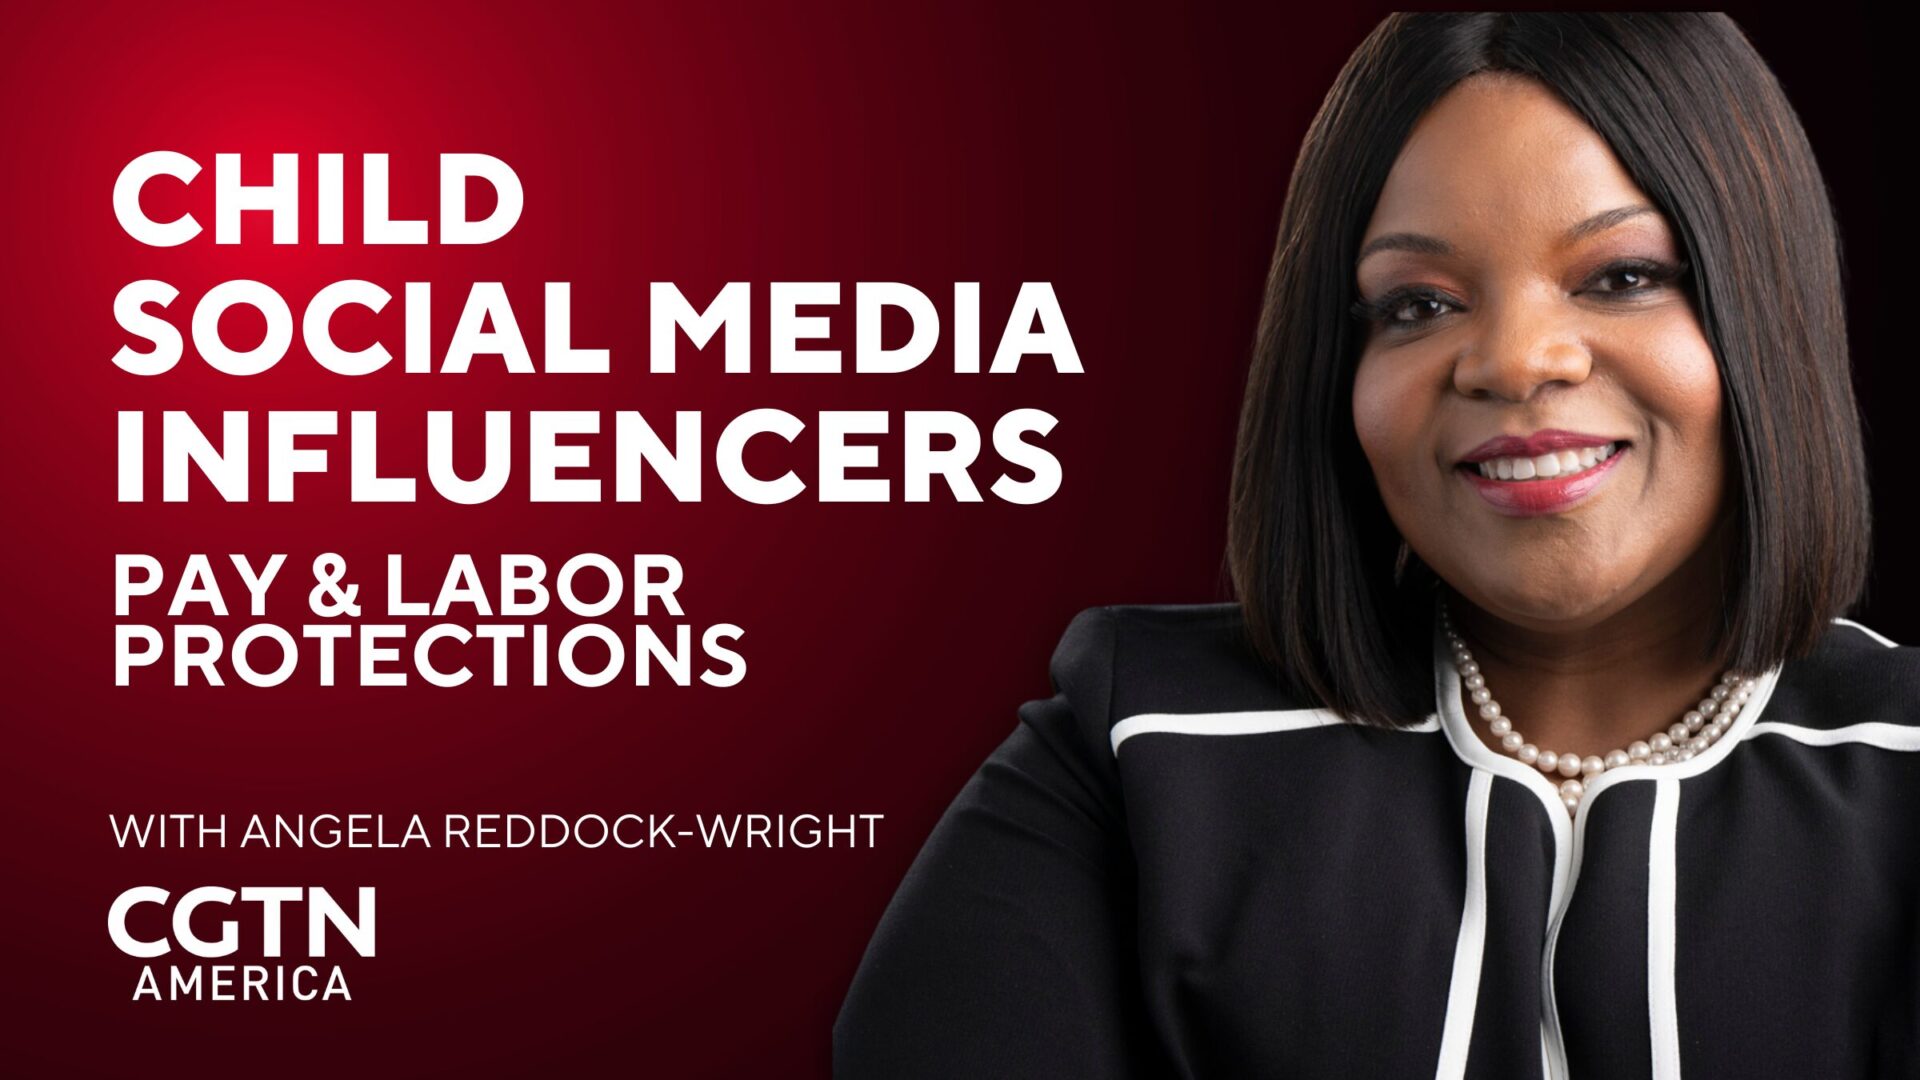 Angela Reddock-Wright on the news discussing an amendment to child labor laws that expands protections for child influencers.